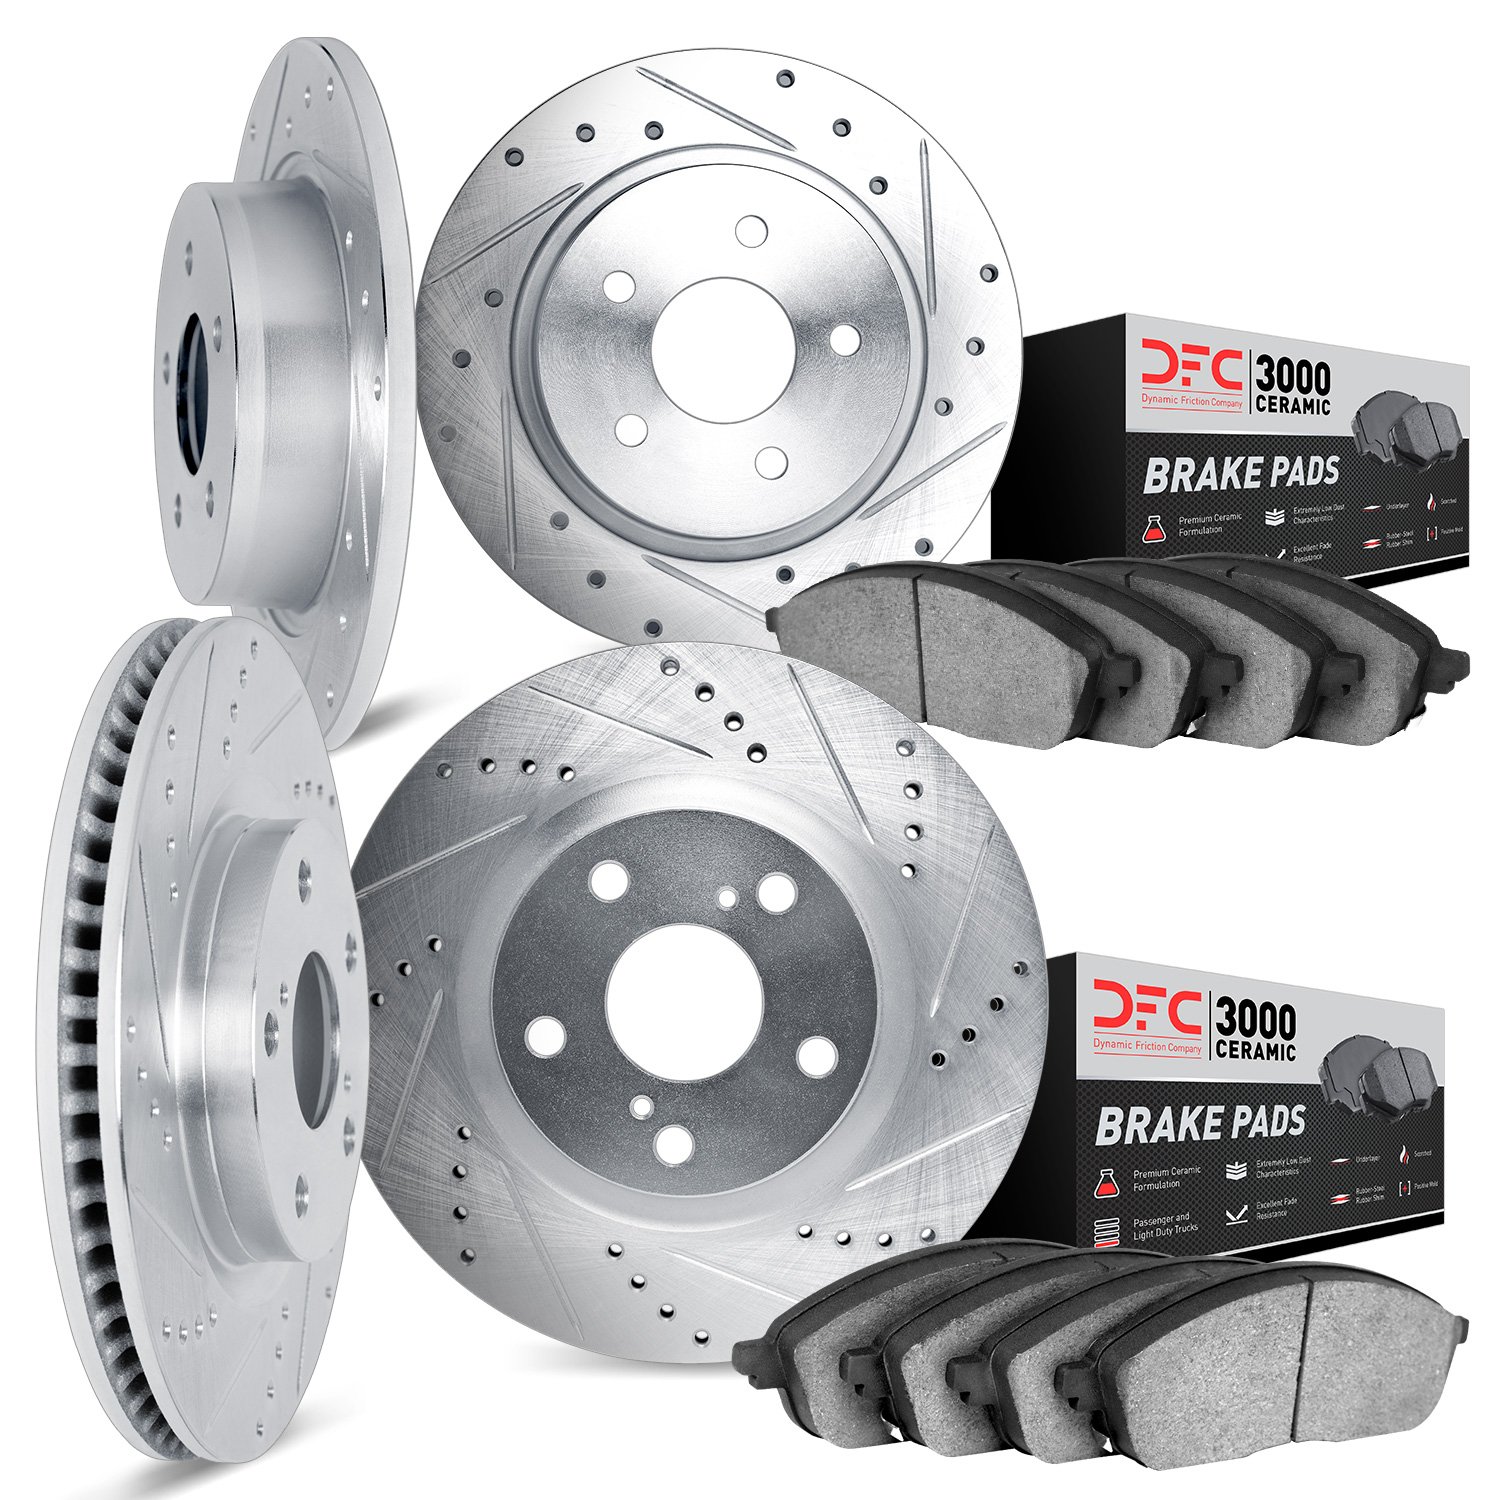 7304-54037 Drilled/Slotted Brake Rotor with 3000-Series Ceramic Brake Pads Kit [Silver], 1997-2002 Ford/Lincoln/Mercury/Mazda, P